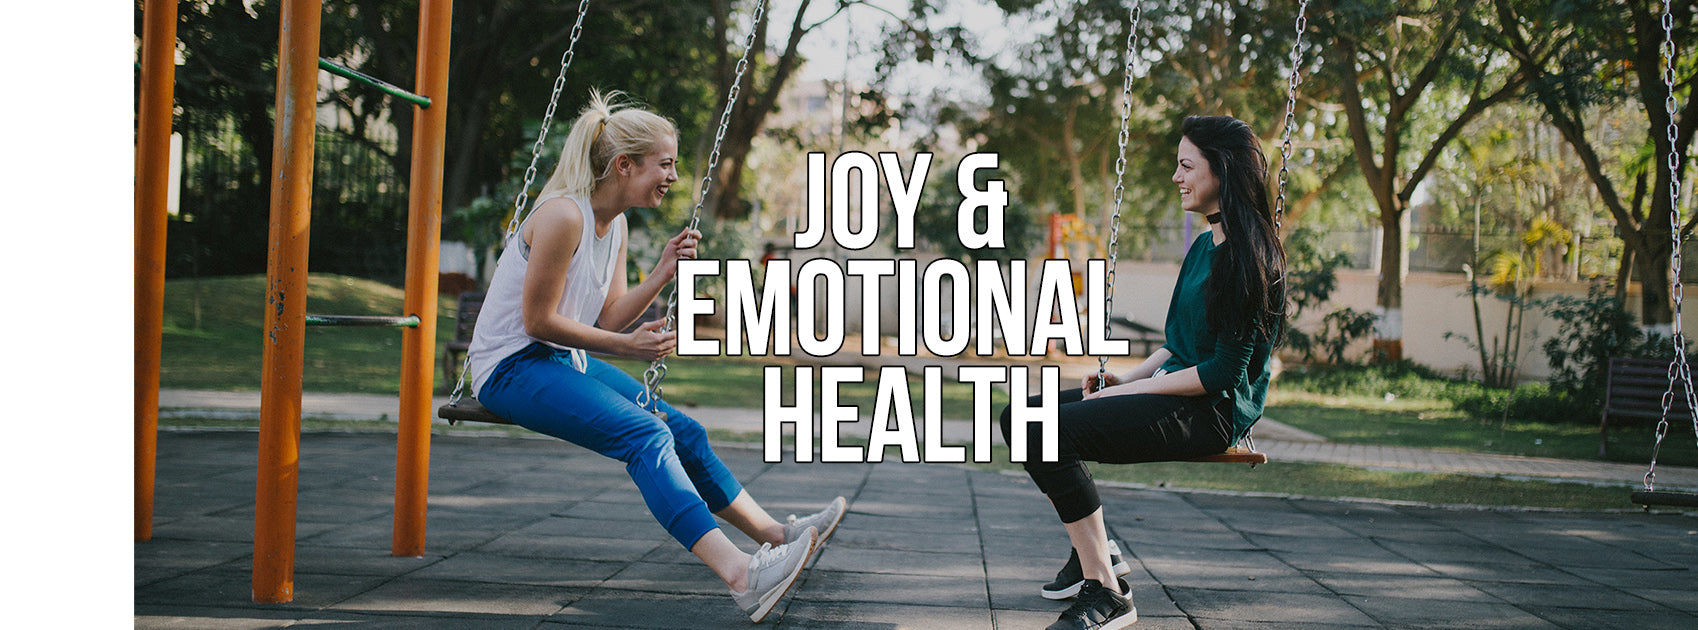 Joy And Emotional Health in Our Daily Lifestyle